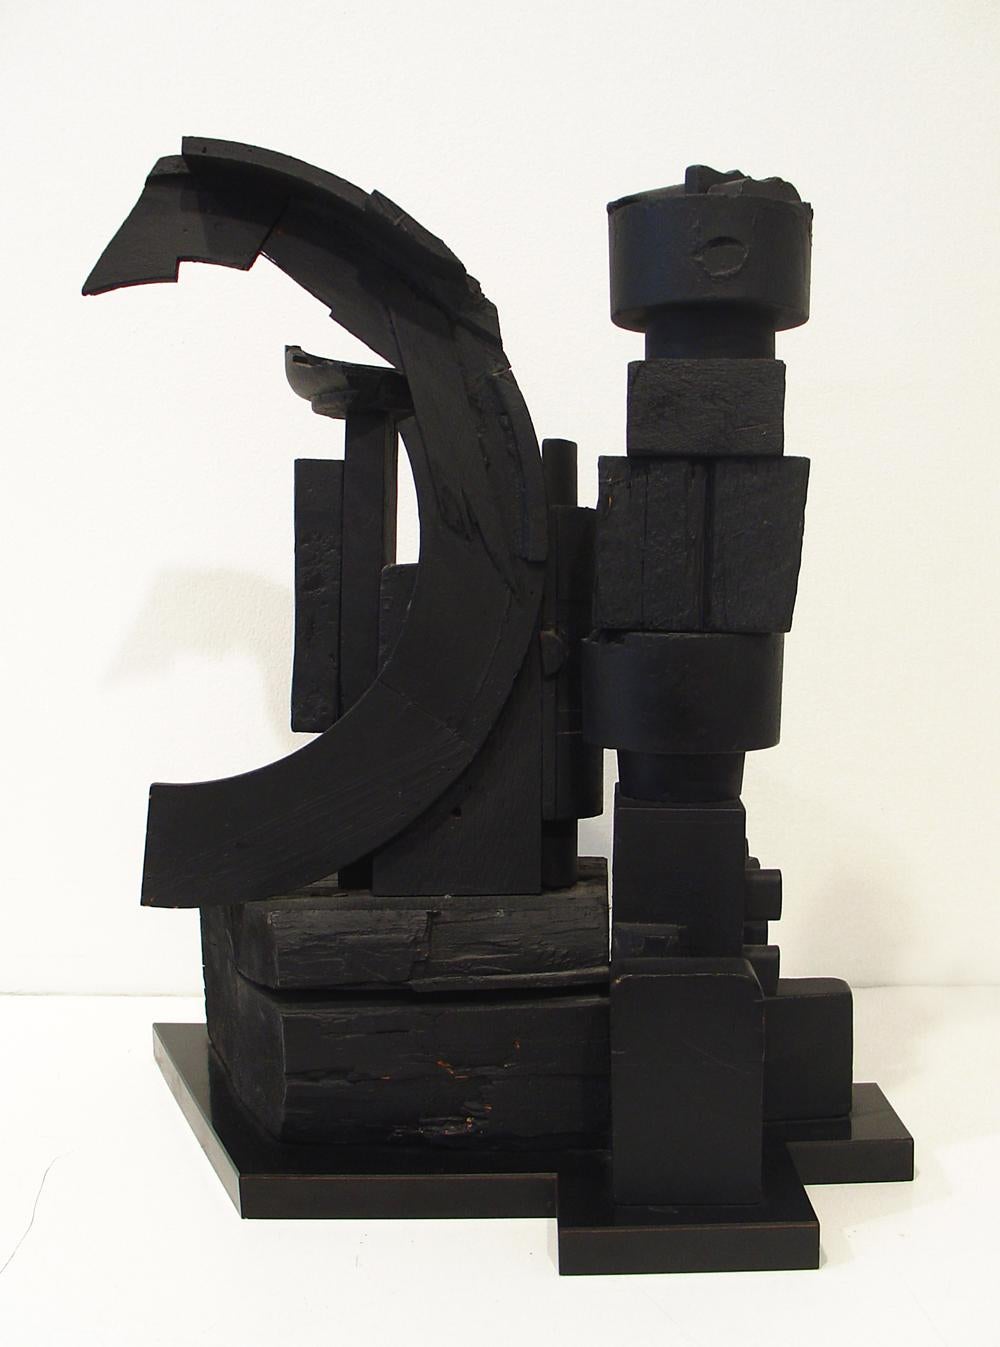 MAQUETTE FOR MONUMENTAL SCULPTURE VII - Modern Sculpture by Louise Nevelson